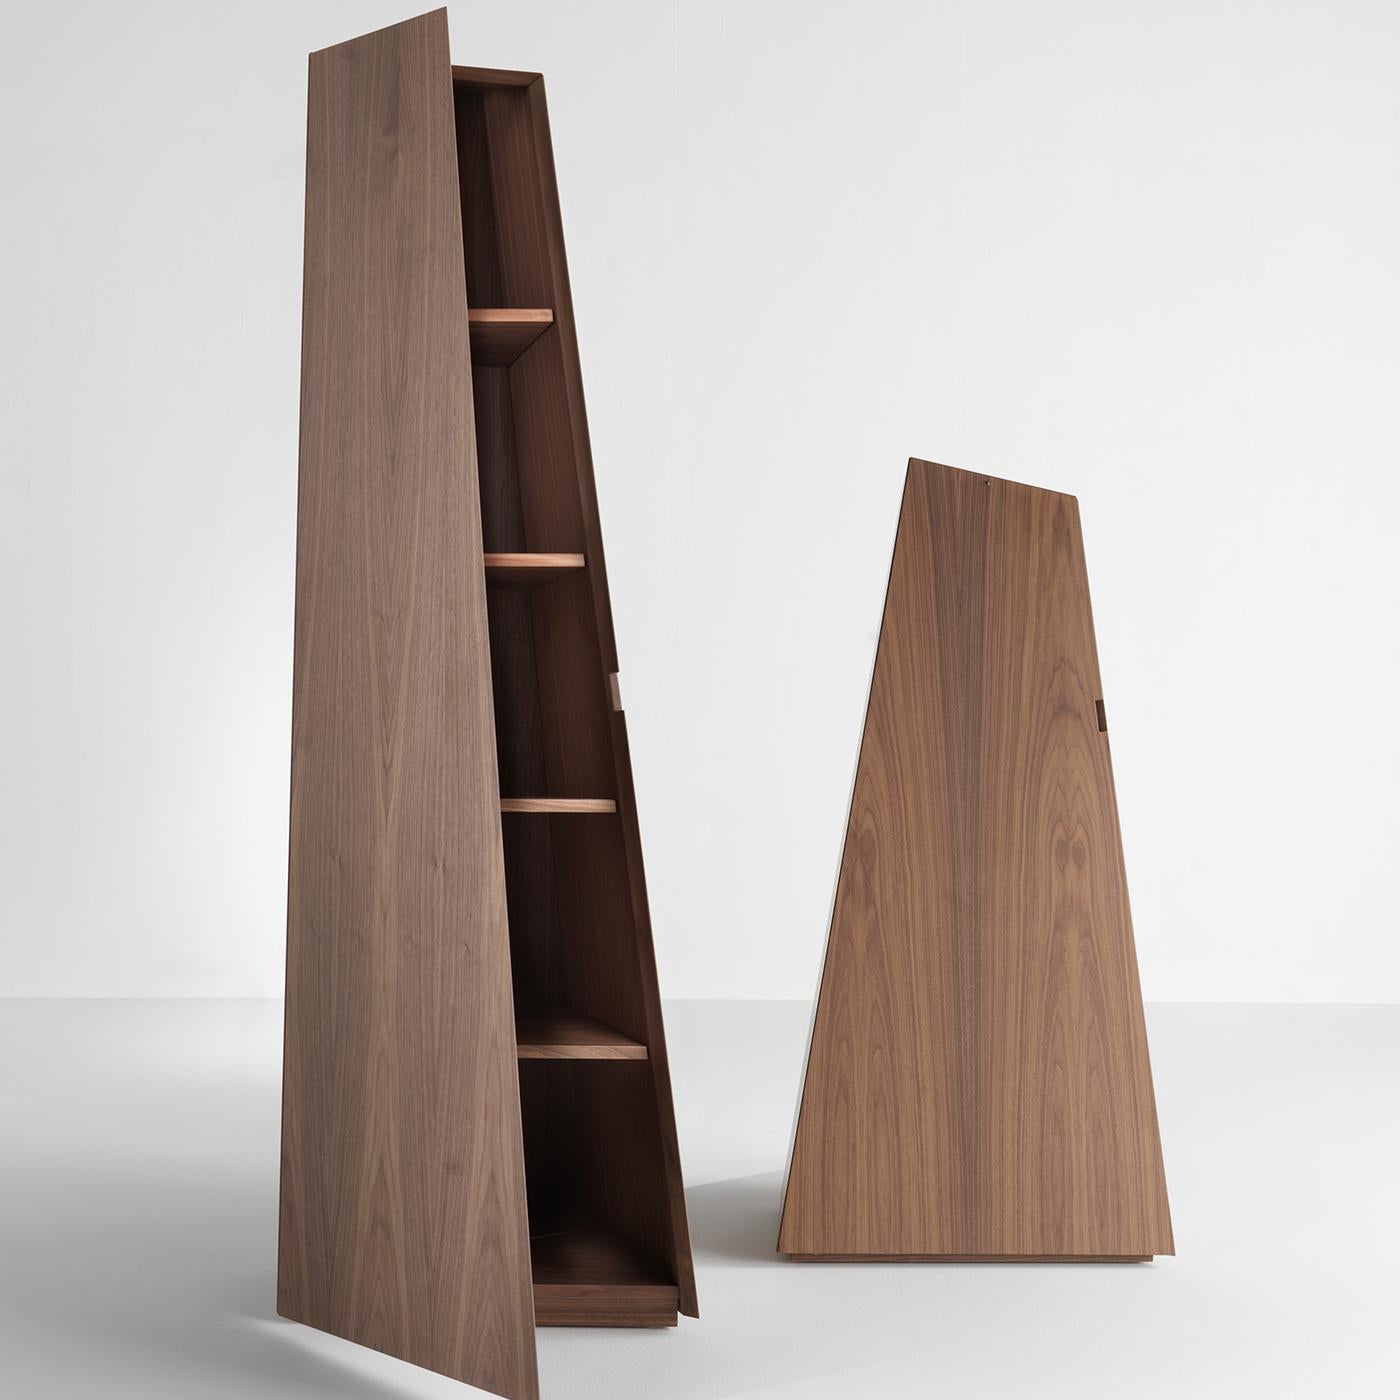 This series of three wooden storage containers with a modern appeal will be a must have for any lovers of modern design that is elegant but practical. These tall, prism-shaped units open up thanks to a hinged door onto practical wooden shelves. This